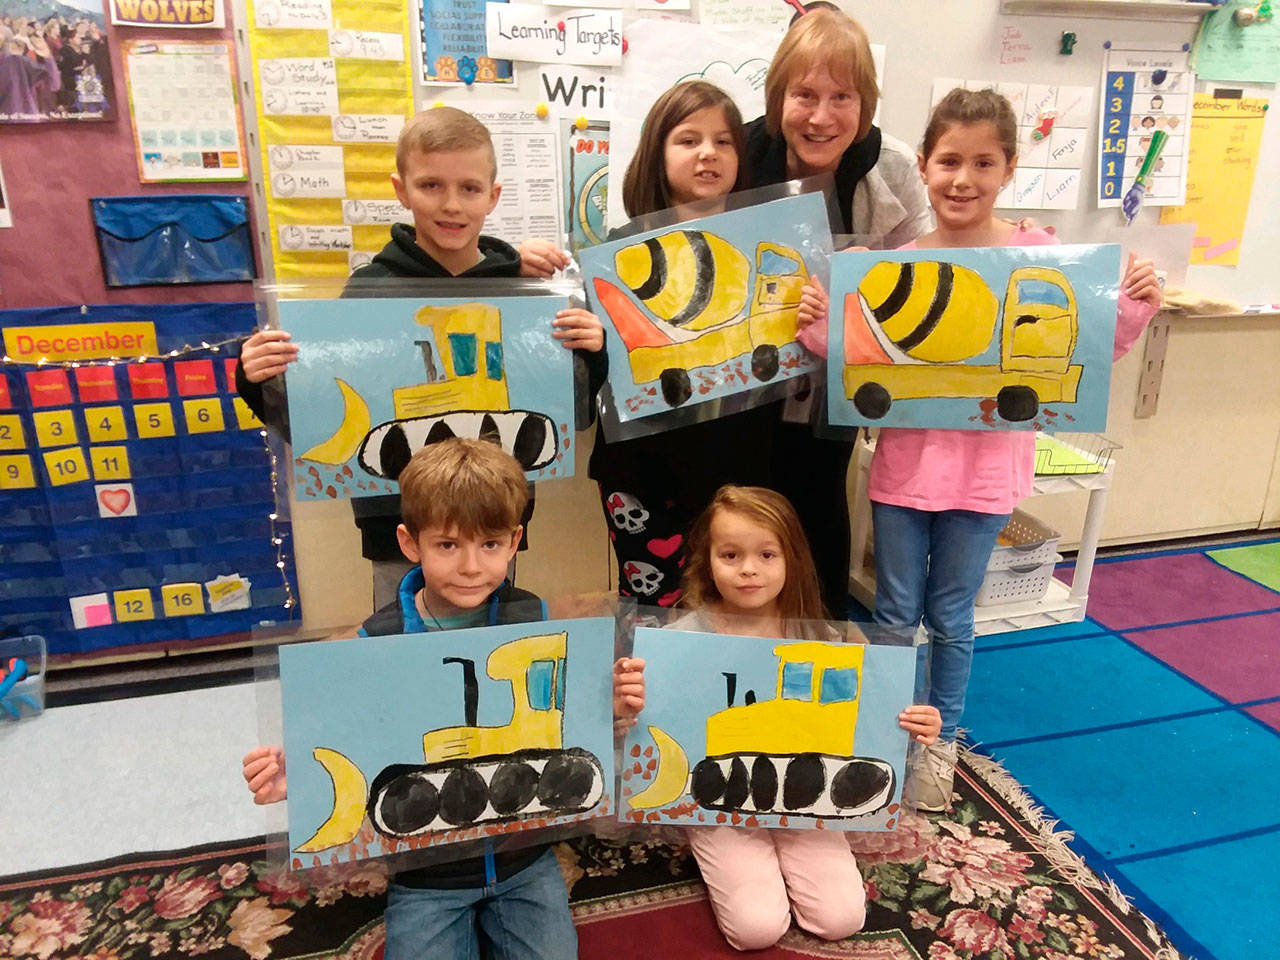 First-graders from Christine MacDougall Danielson’s class create artwork inspired by the Fir Street construction project to make placemats for school board directors. Pictured are (back row, from left) Aden Uhlig, Corinne Piersoll, MacDougall Danielson and Fenja Johnson, with (front row, from left) Makai Garten and Evelyn Moose. Photo by Patsene Dashiell